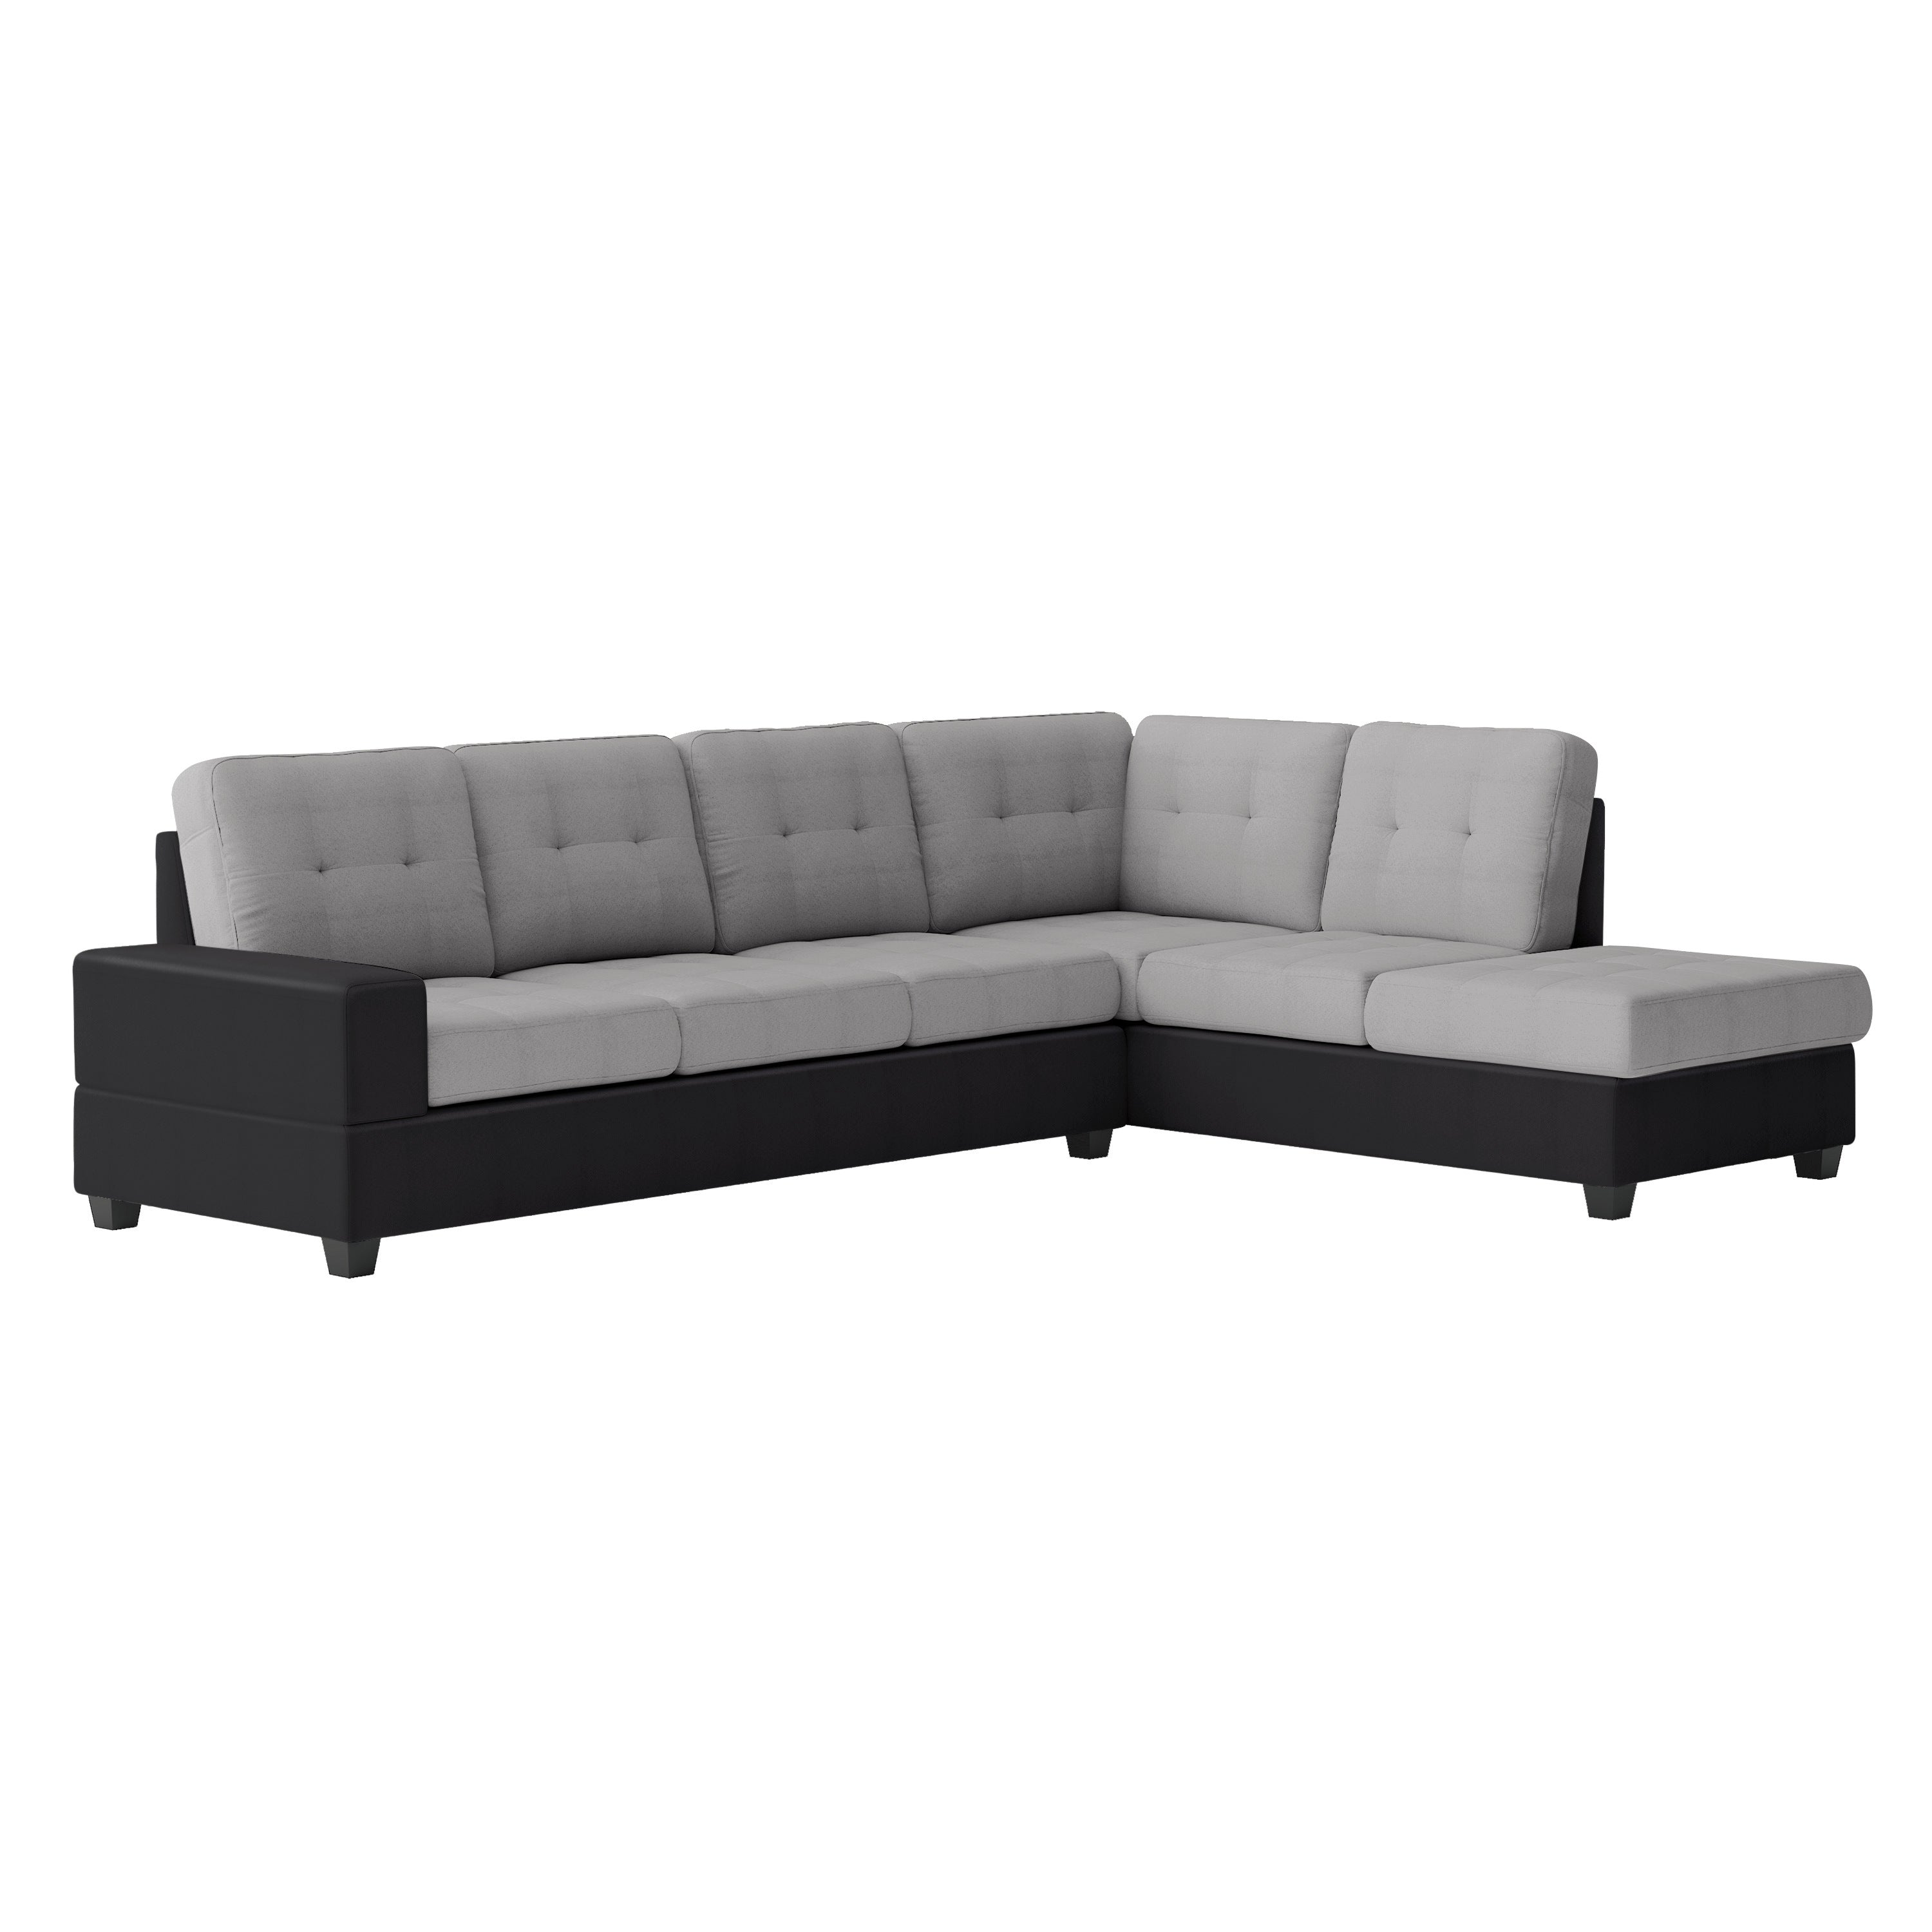 Maxine 3-piece Reversible Sectional w/ Ottoman in Gray & Black